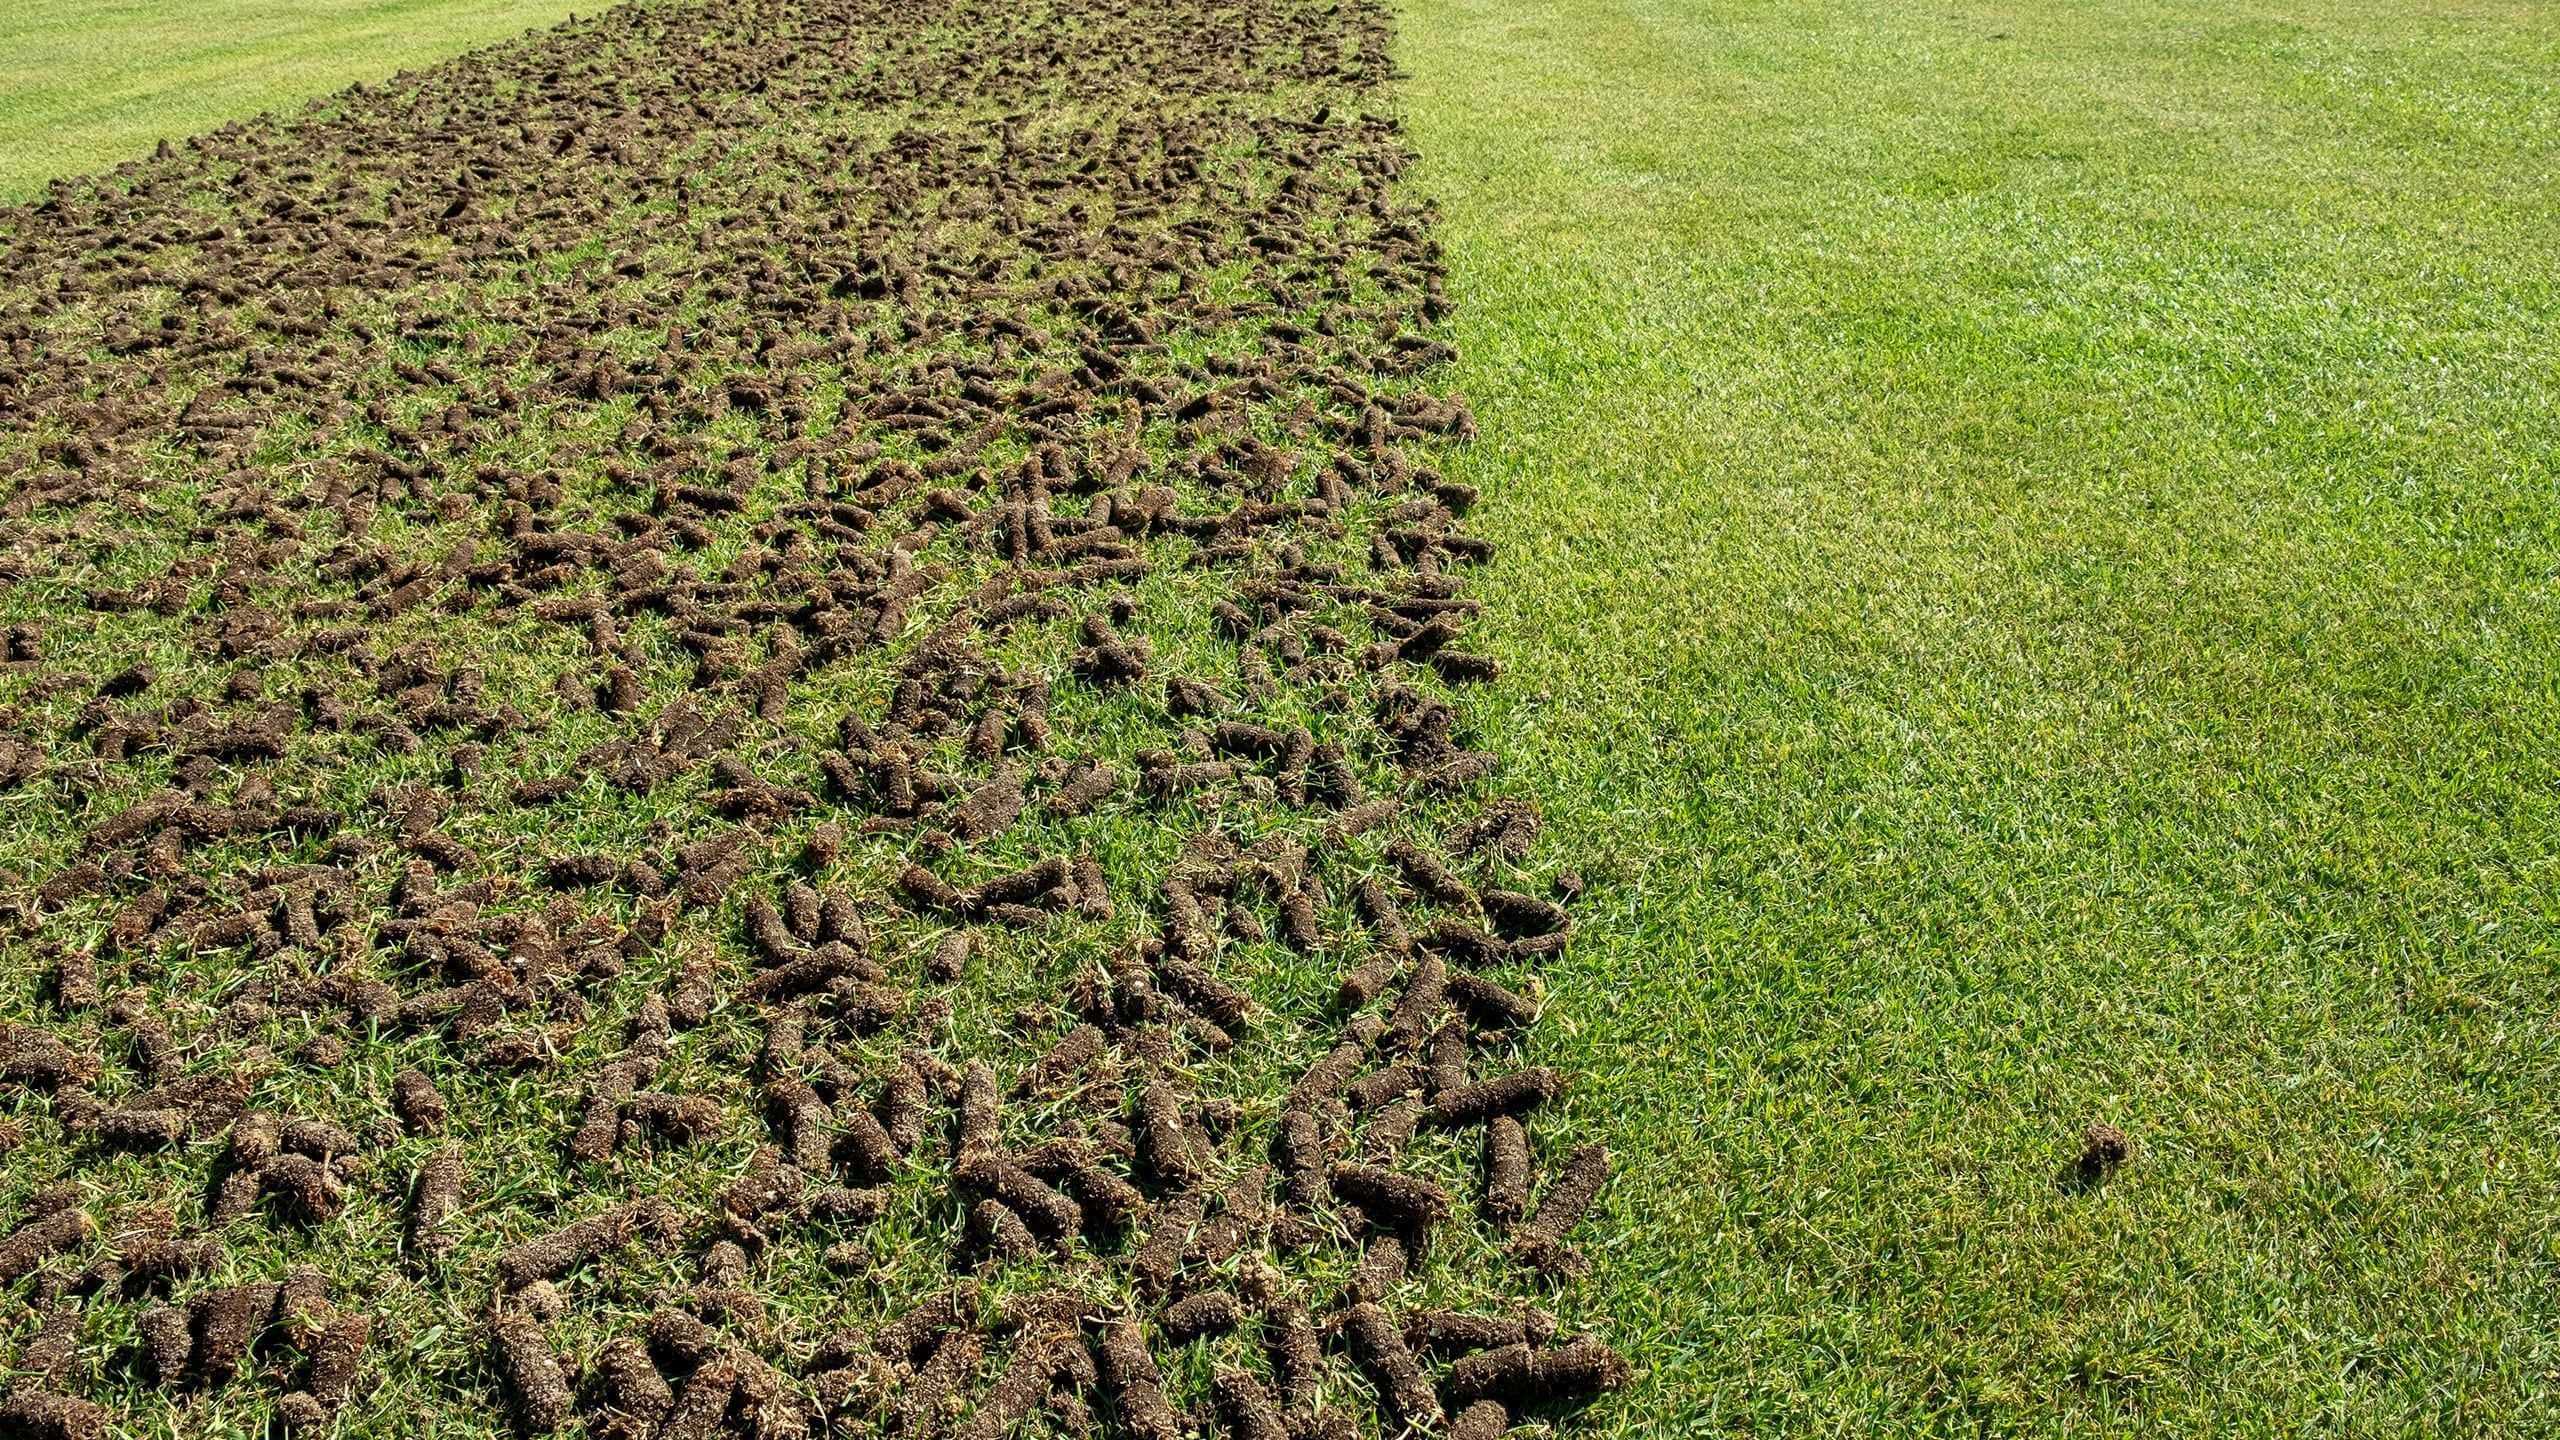 aeration holes in a lawn